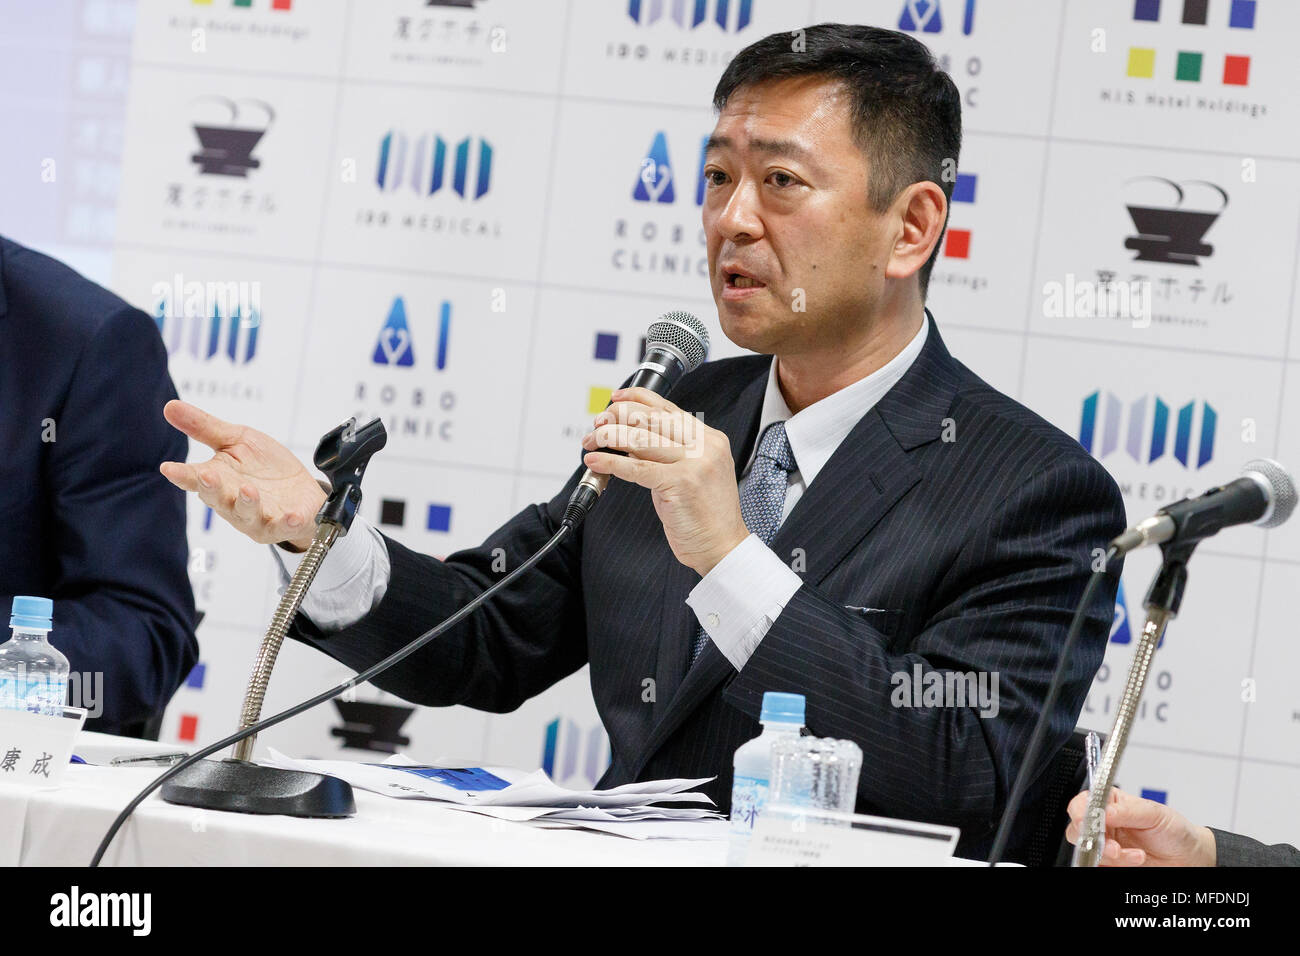 IDO MEDICAL Co., Ltd. president Yasunari Kageyama speaks during a news conference on April 25, 2018, Tokyo, Japan. Sawada announced an alliance with IDO MEDICAL to set up an AI (Artificial Intelligence) Robot Clinic in its new branch of Henn-na (Weird) Hotel located near to Hamamatsucho Station. Credit: Rodrigo Reyes Marin/AFLO/Alamy Live News Stock Photo